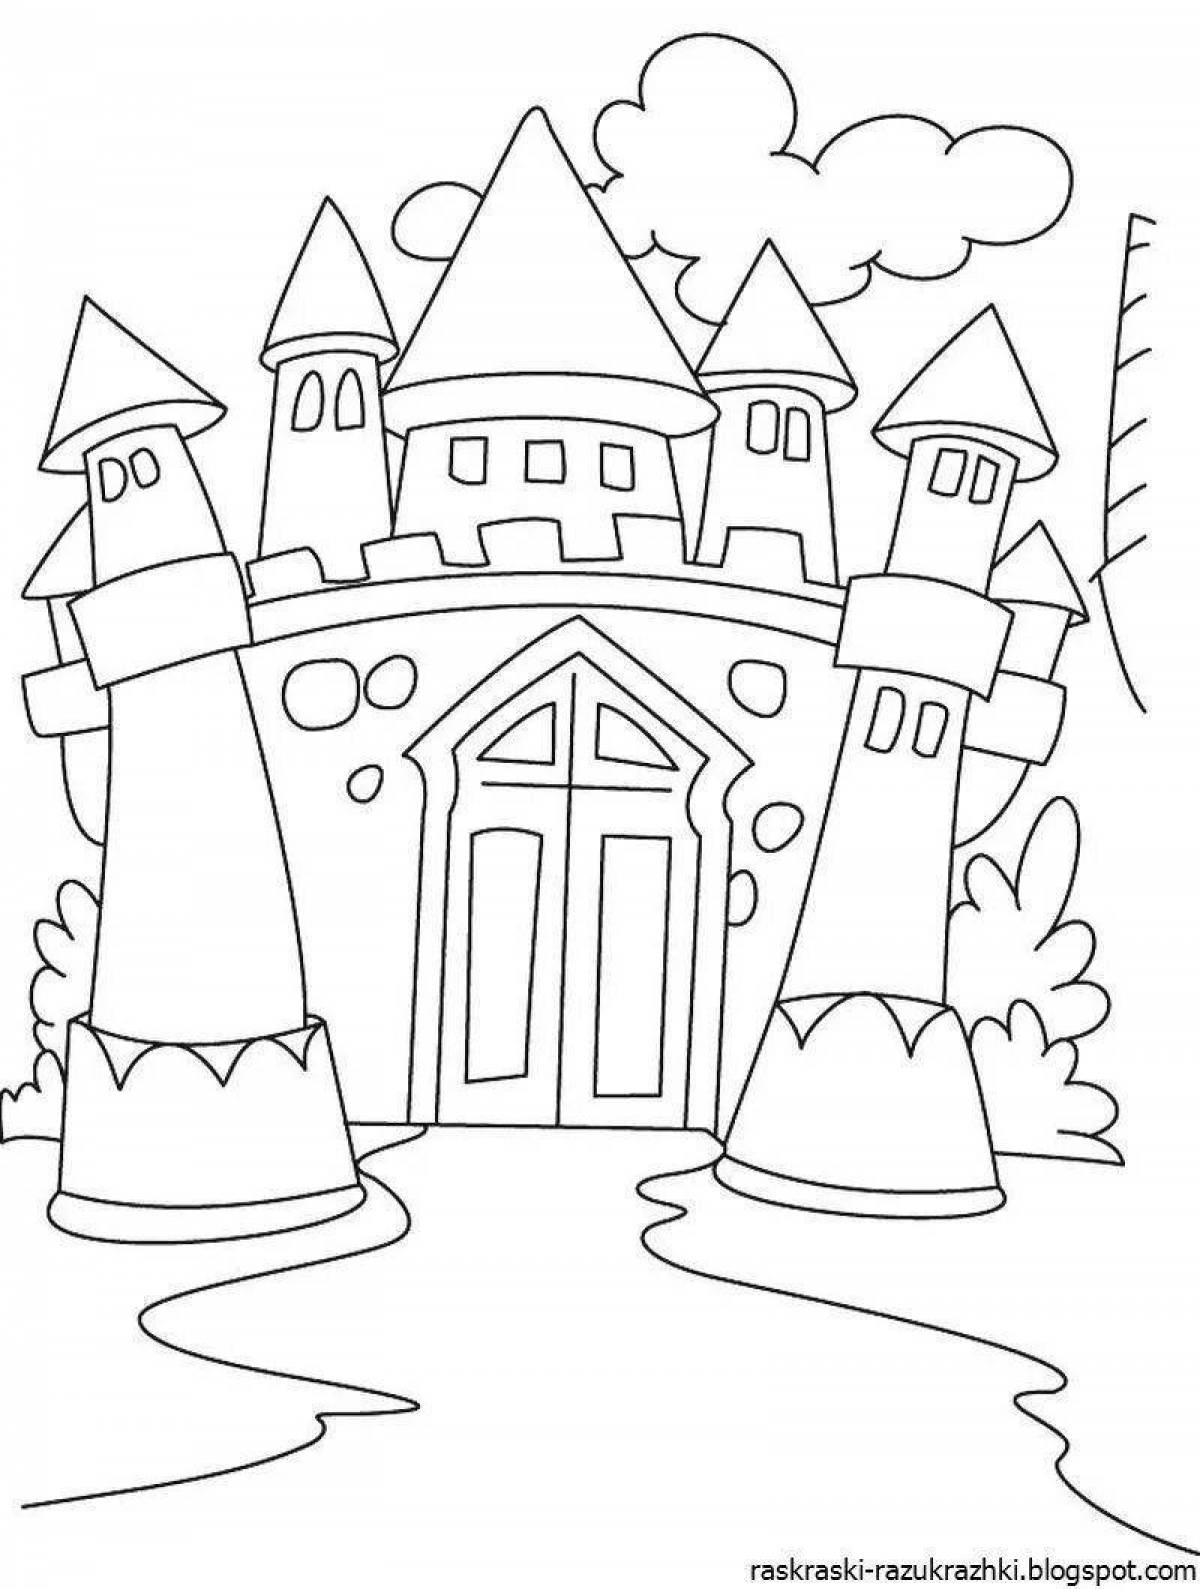 Complex coloring book castle for children 4-5 years old